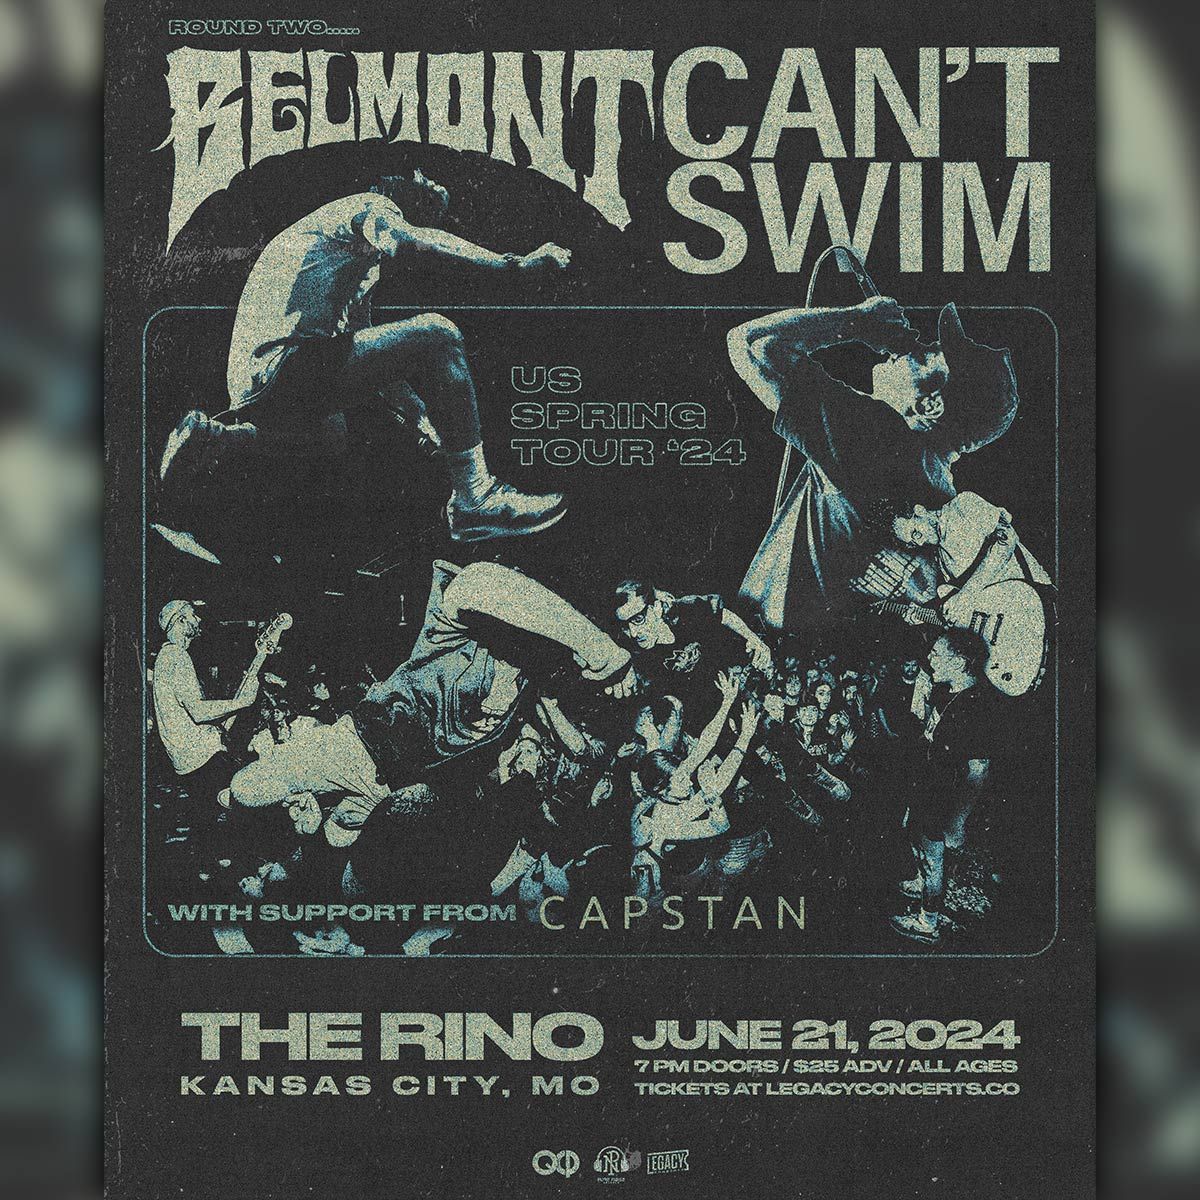 *SOLD OUT* Belmont, Can't Swim at The Rino